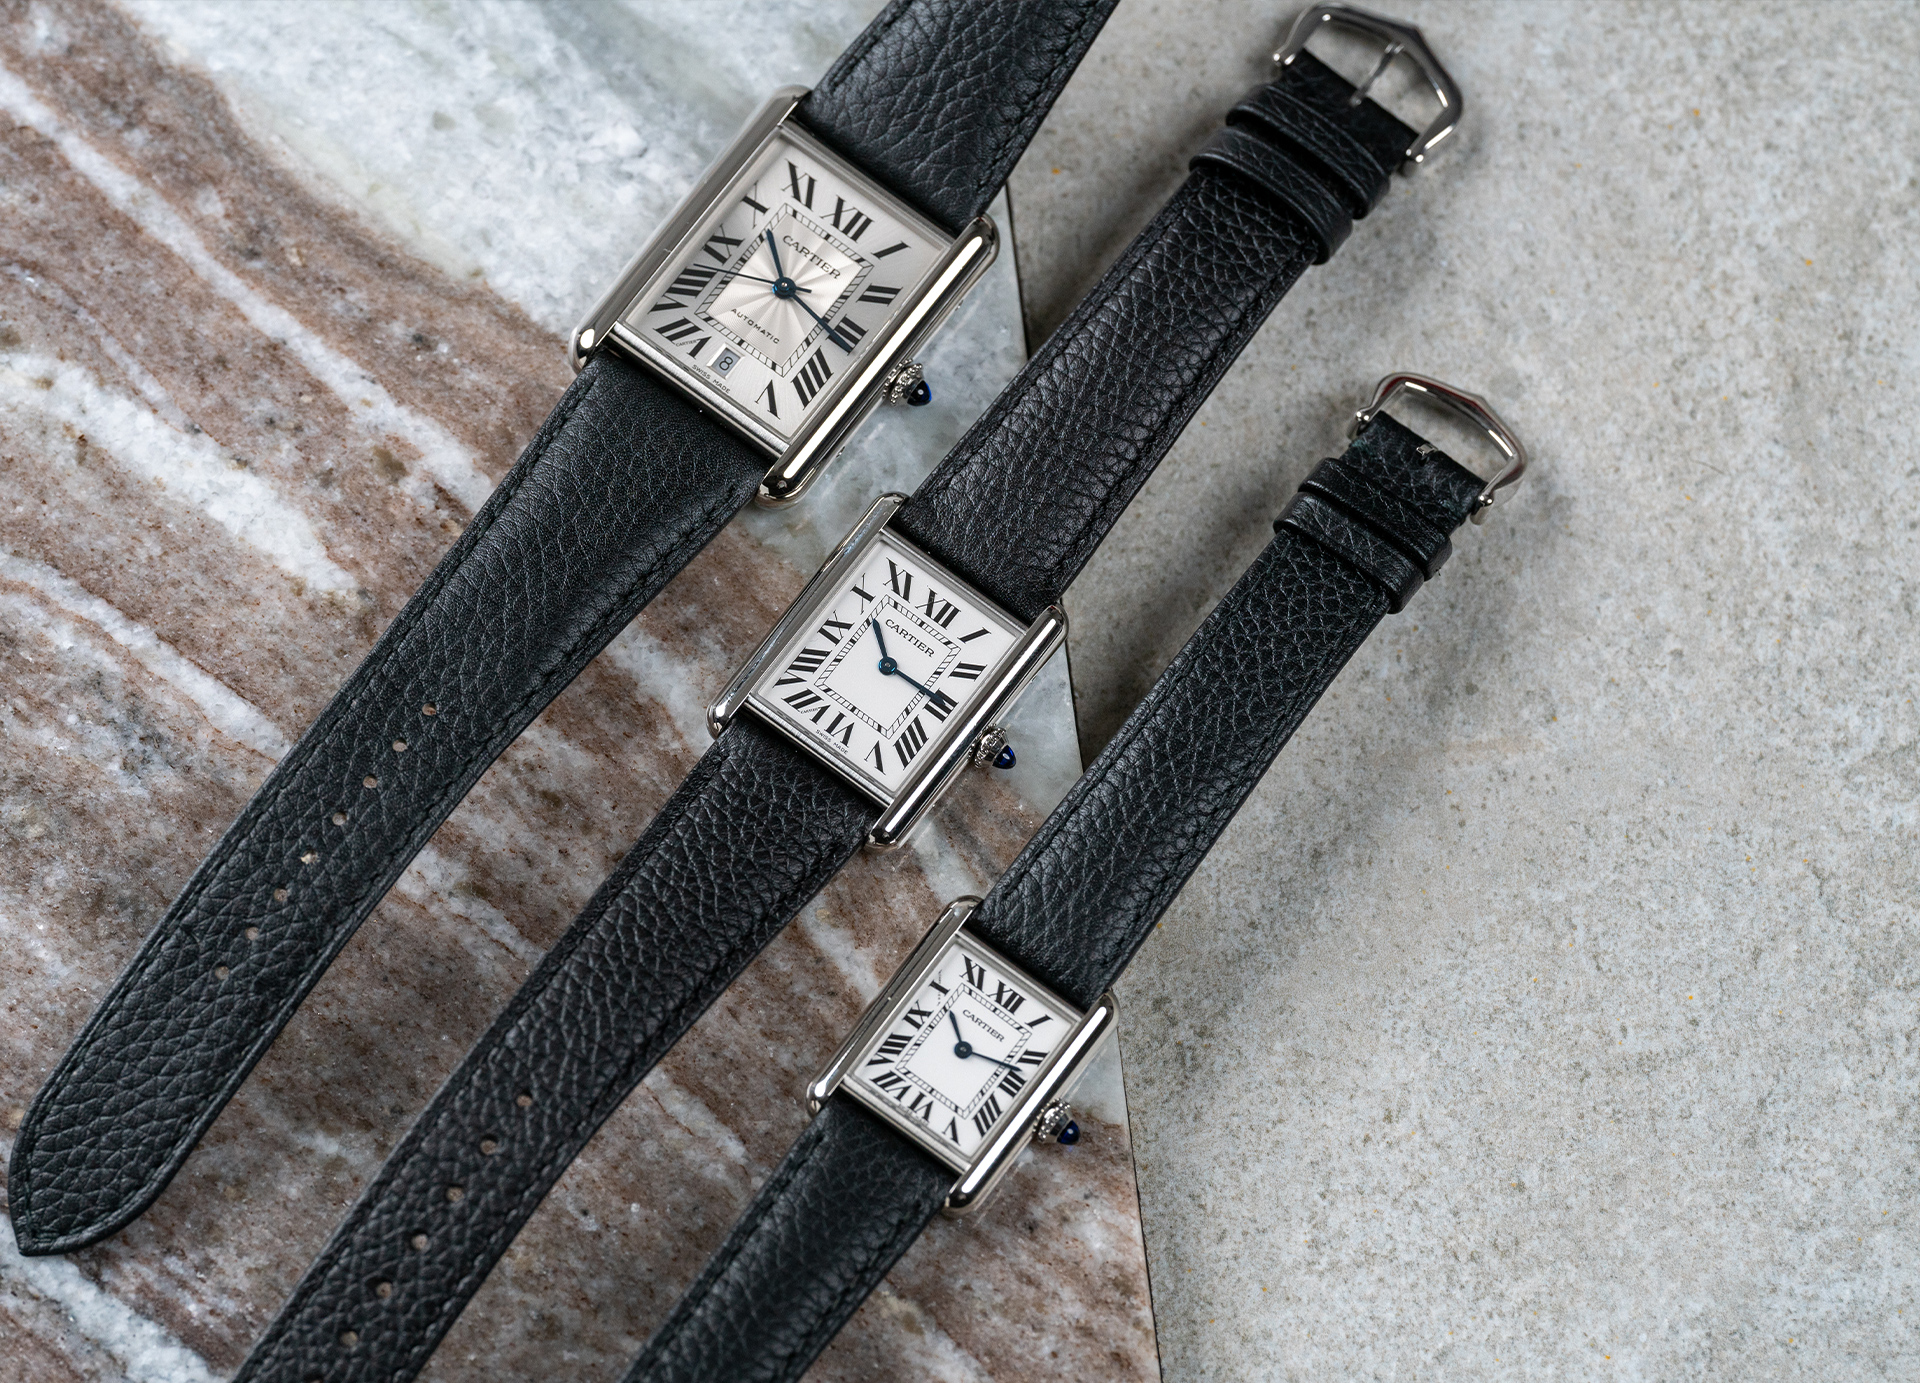 New 2021 Cartier Tank Must XL: Initial Thoughts